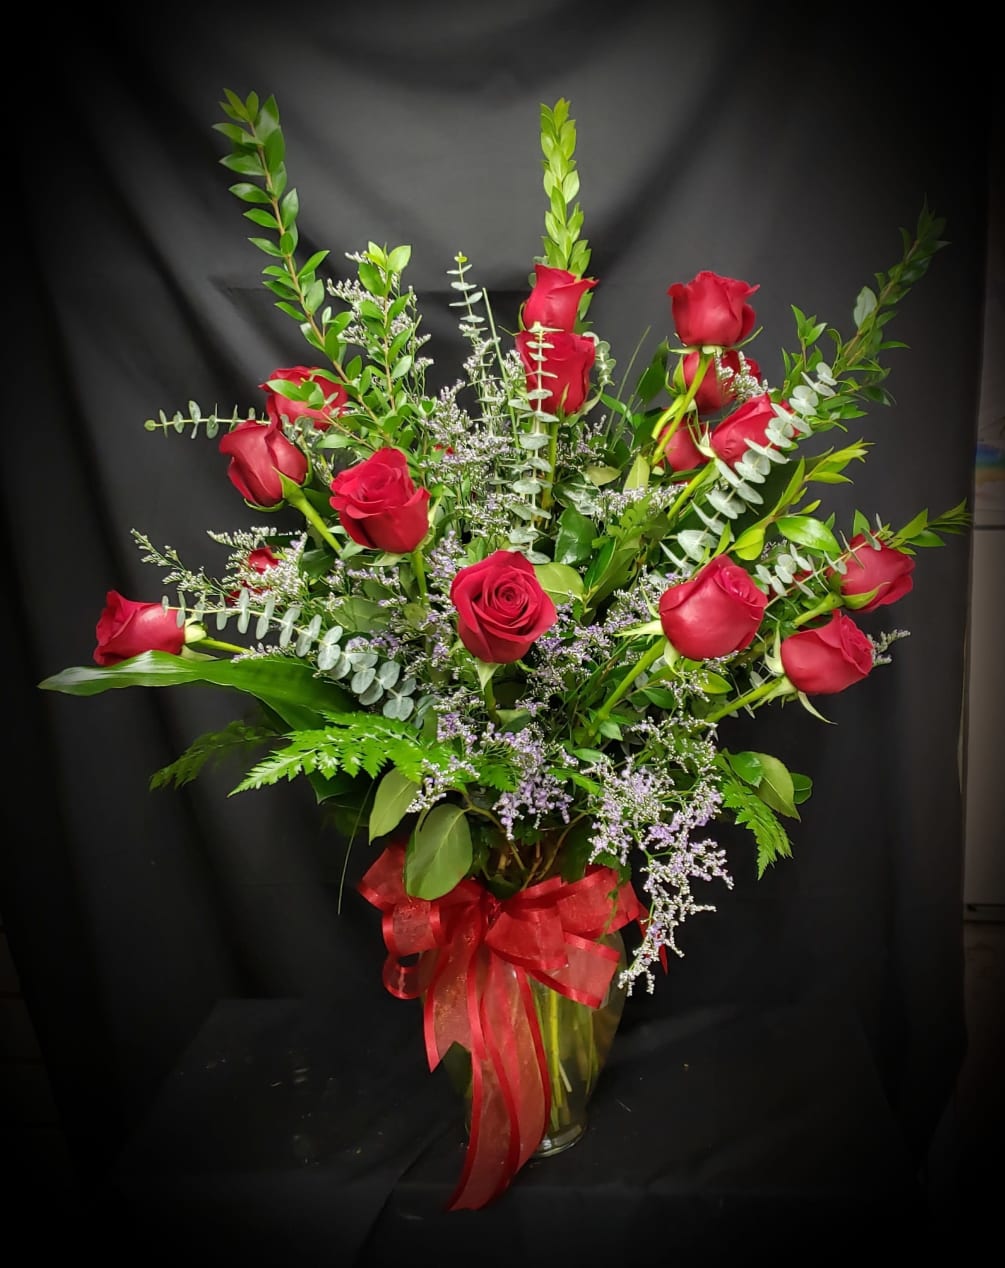 18 Long stem red roses fill with various select greens and limonium.